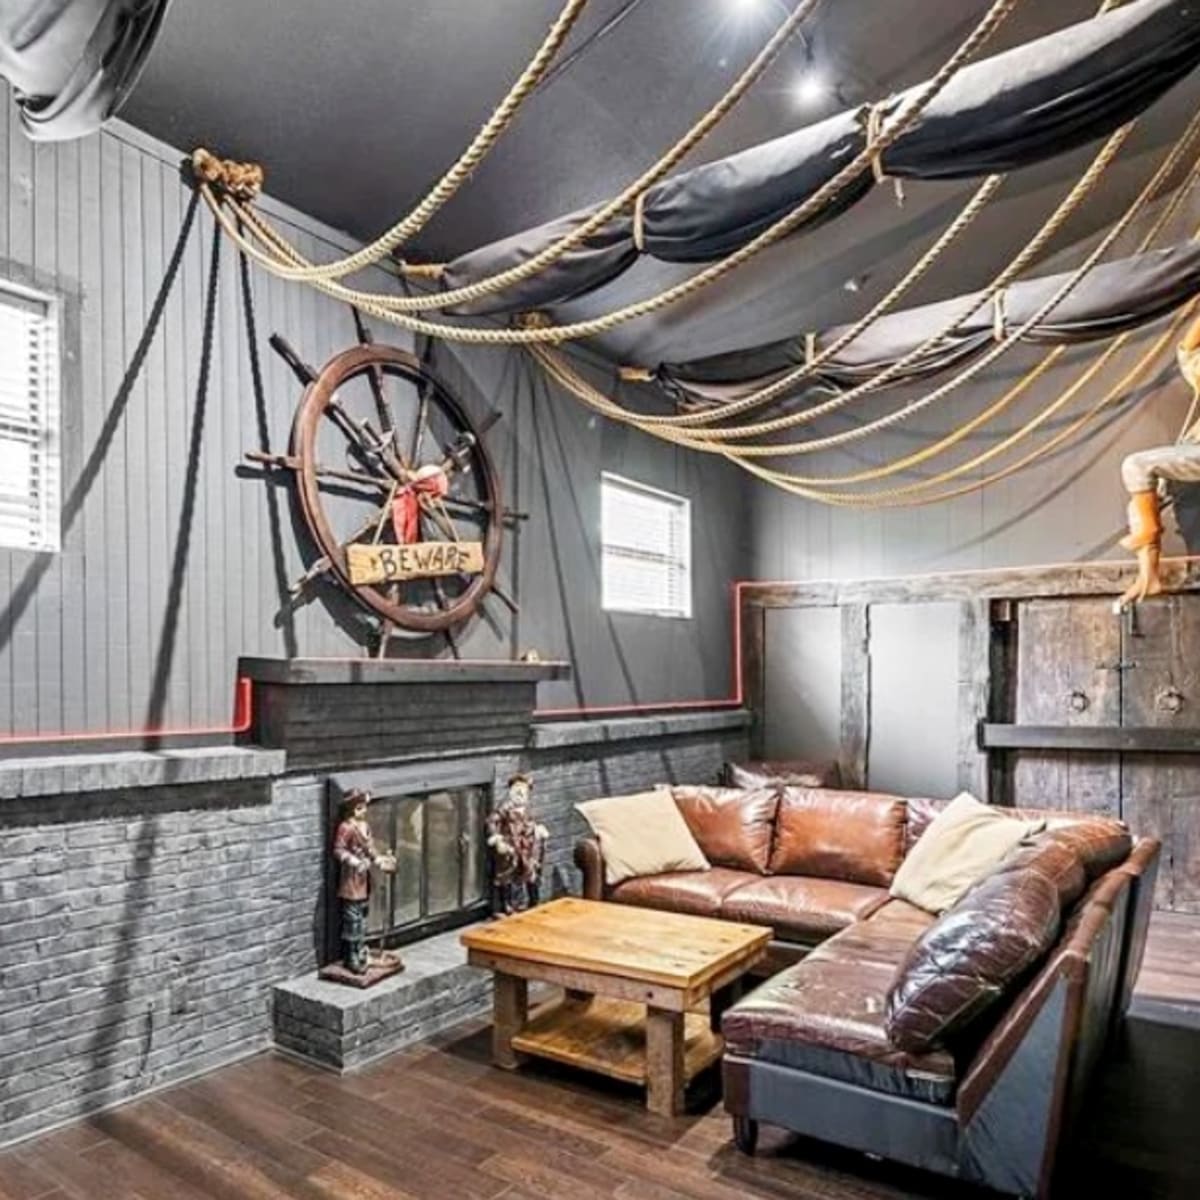 Pirates of the Caribbean'-Themed House for Sale in Viral Listing - Men's  Journal